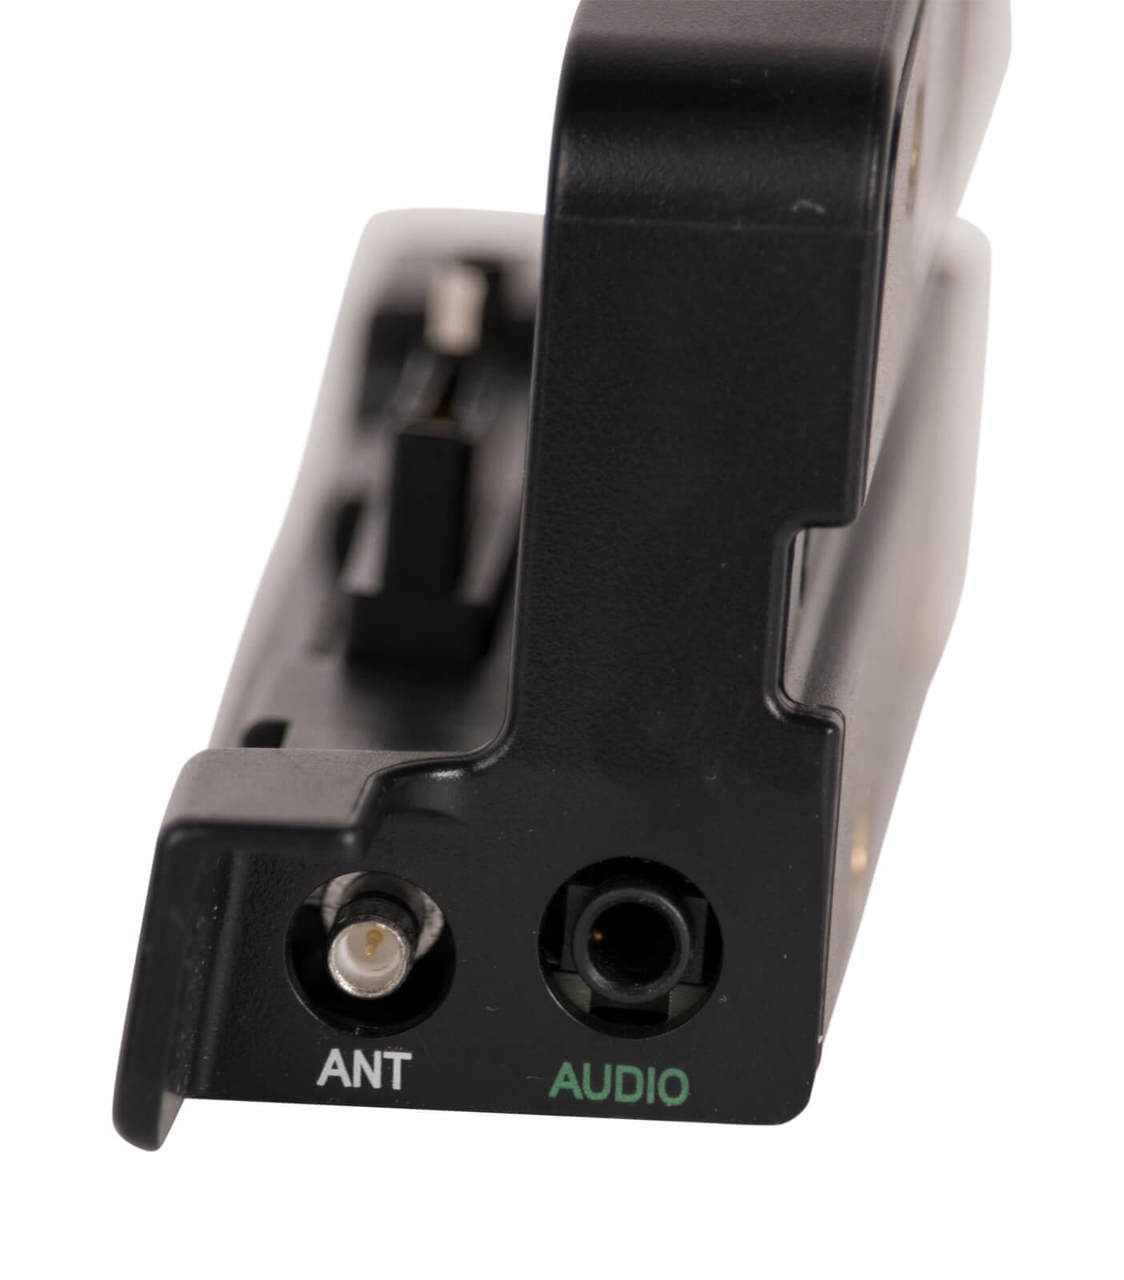 side view of audio and antenna port